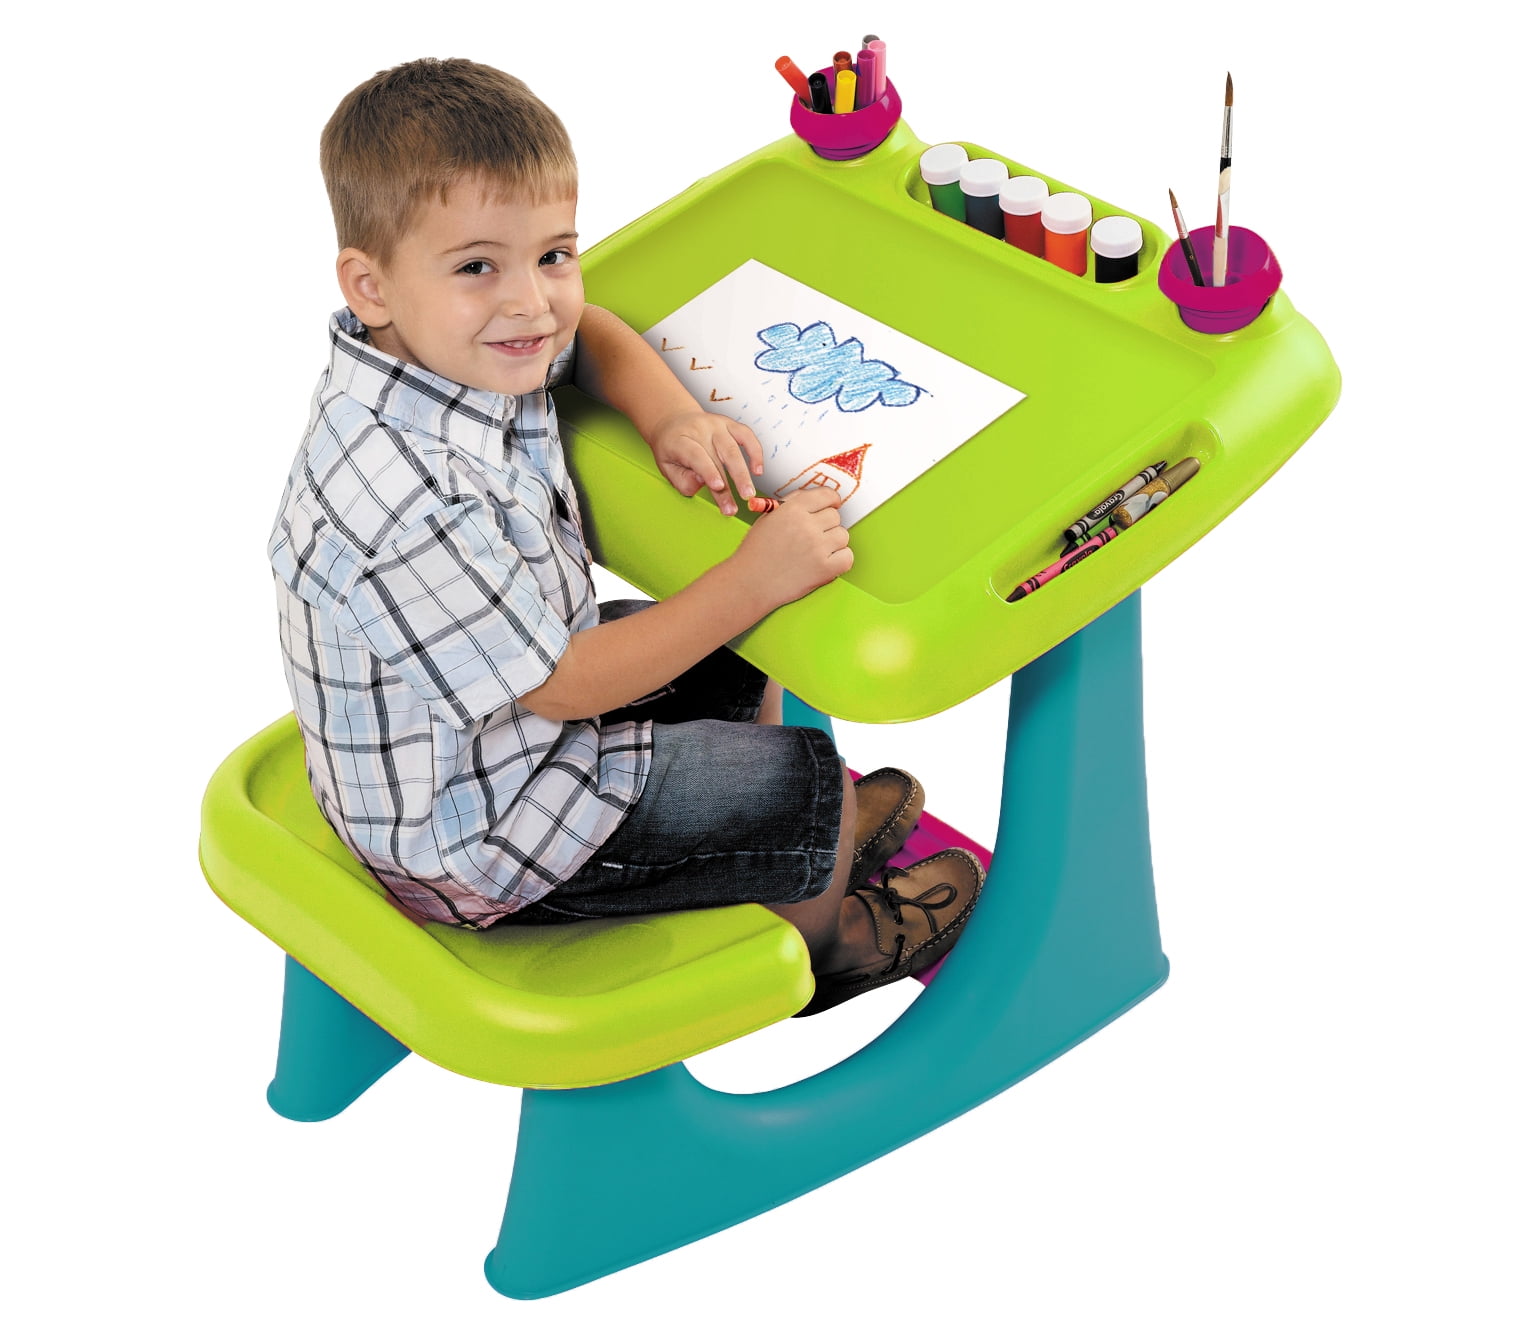 Keter Kids Sit and Draw Art Table Creativity Desk with Craft Storage